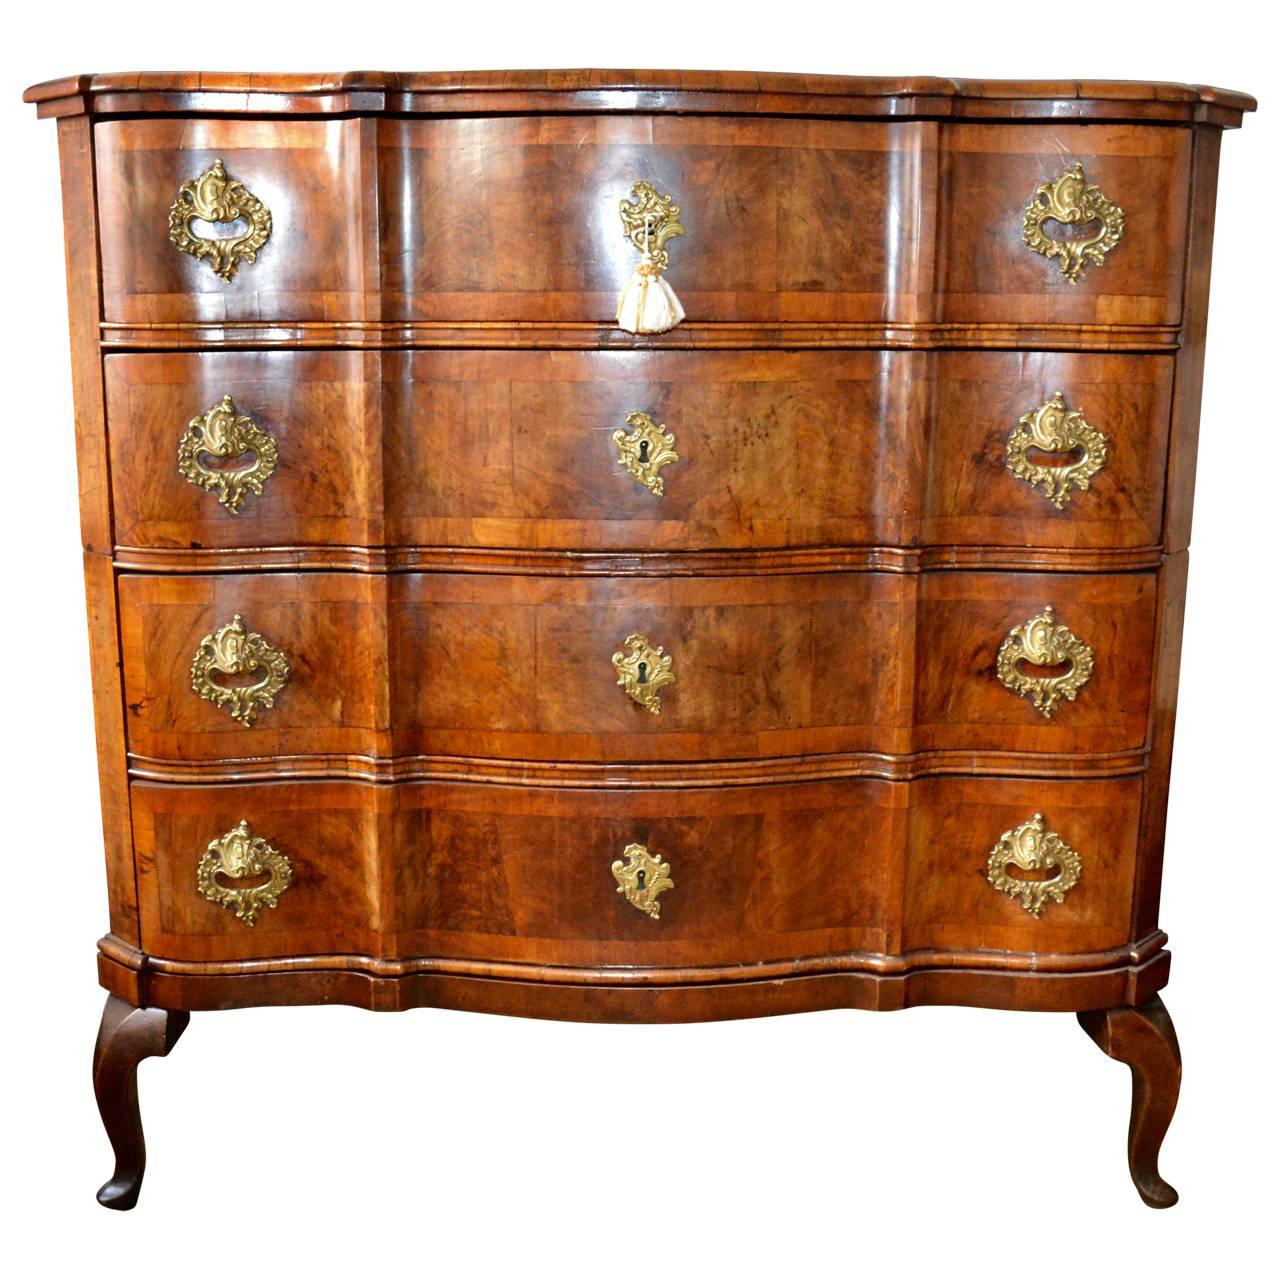 Baroque Large Danish 18th Century Mahogany Dresser Or Chest of Drawers For Sale